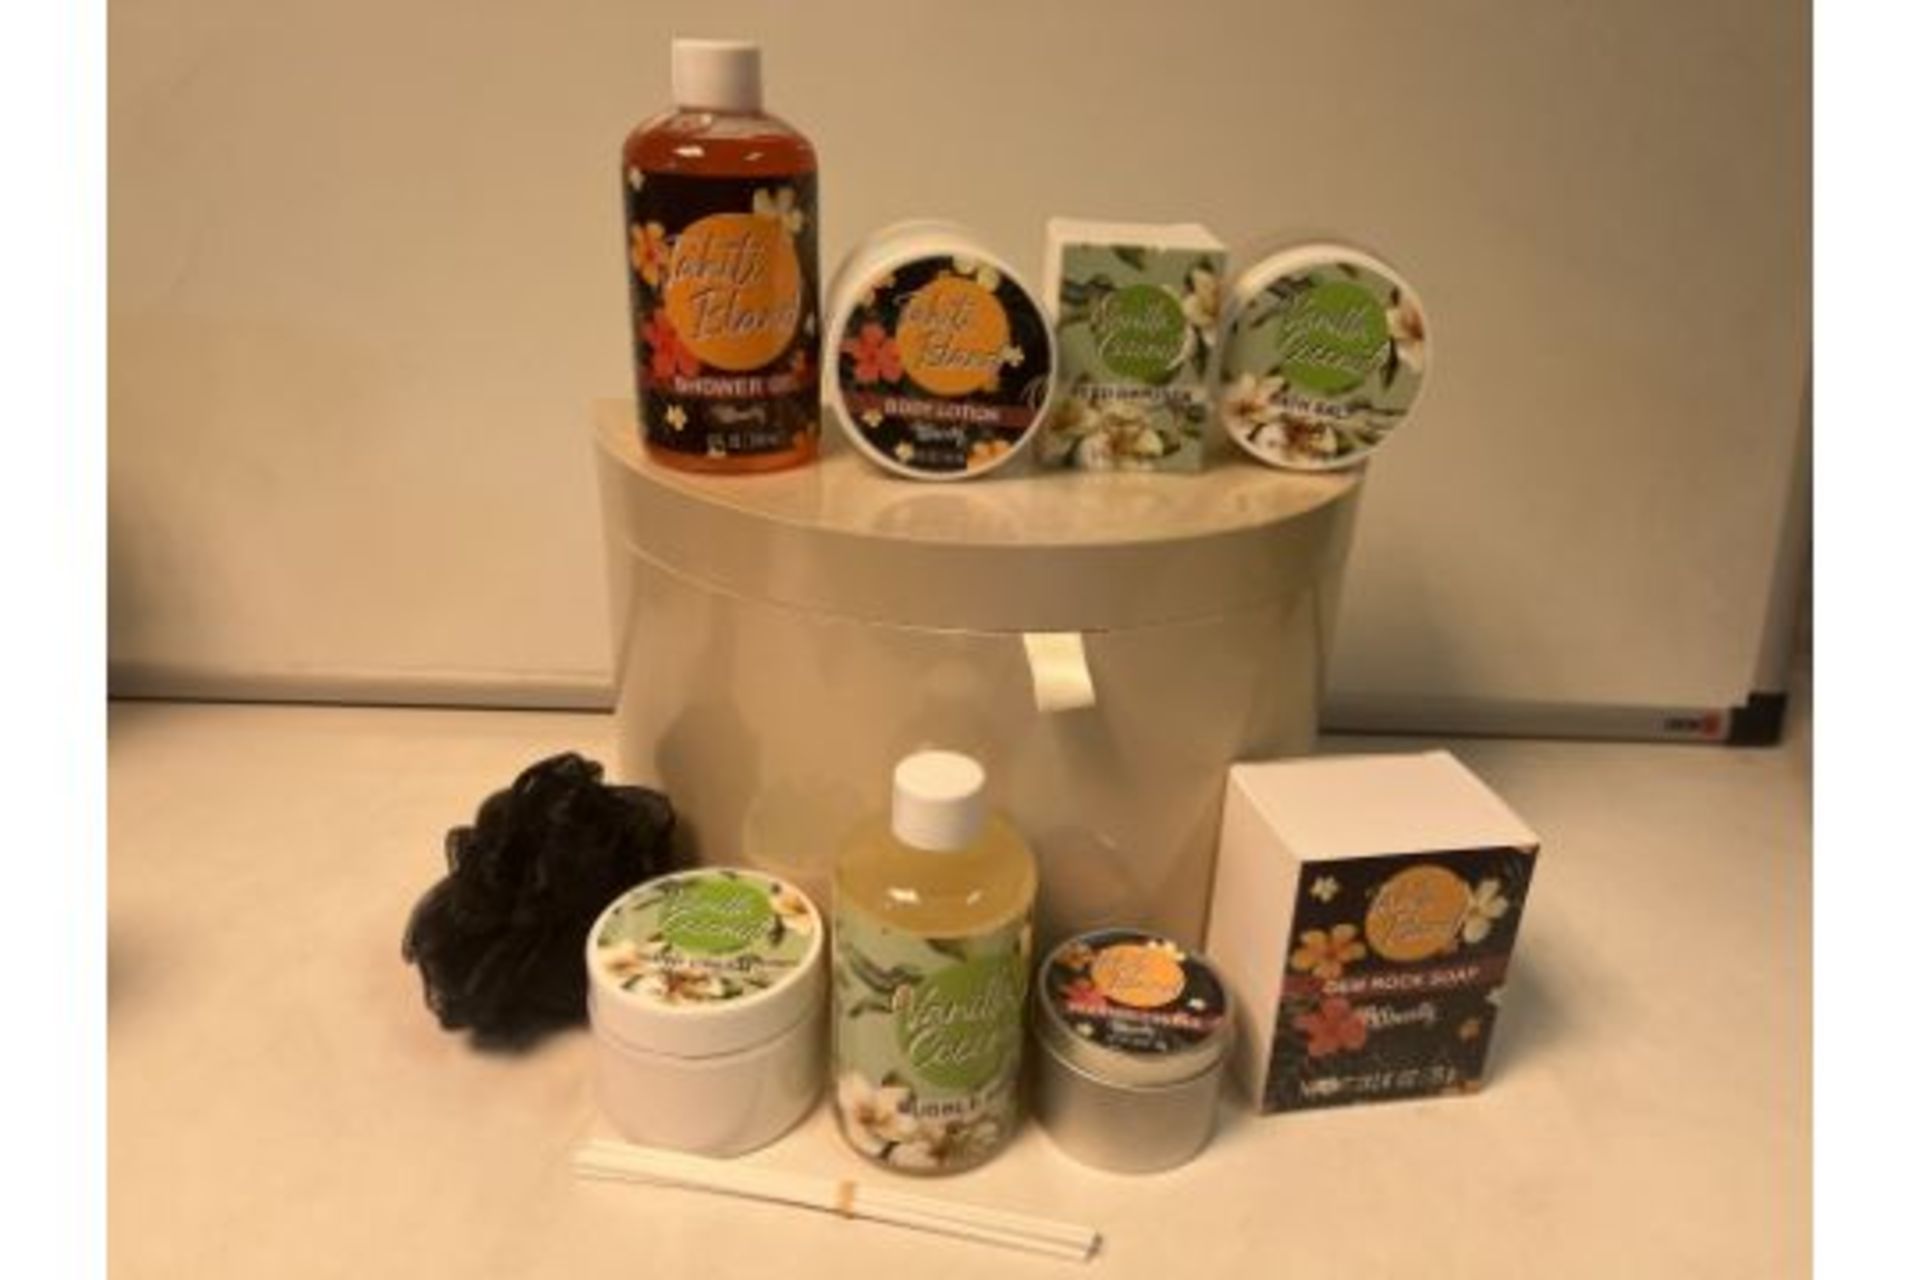 4 X BRAND NEW BATH AND BODY SETS INCLUDING SHOWER GEL, BUBBLE BATH, BODY LOTION, HAND CREAM, REED